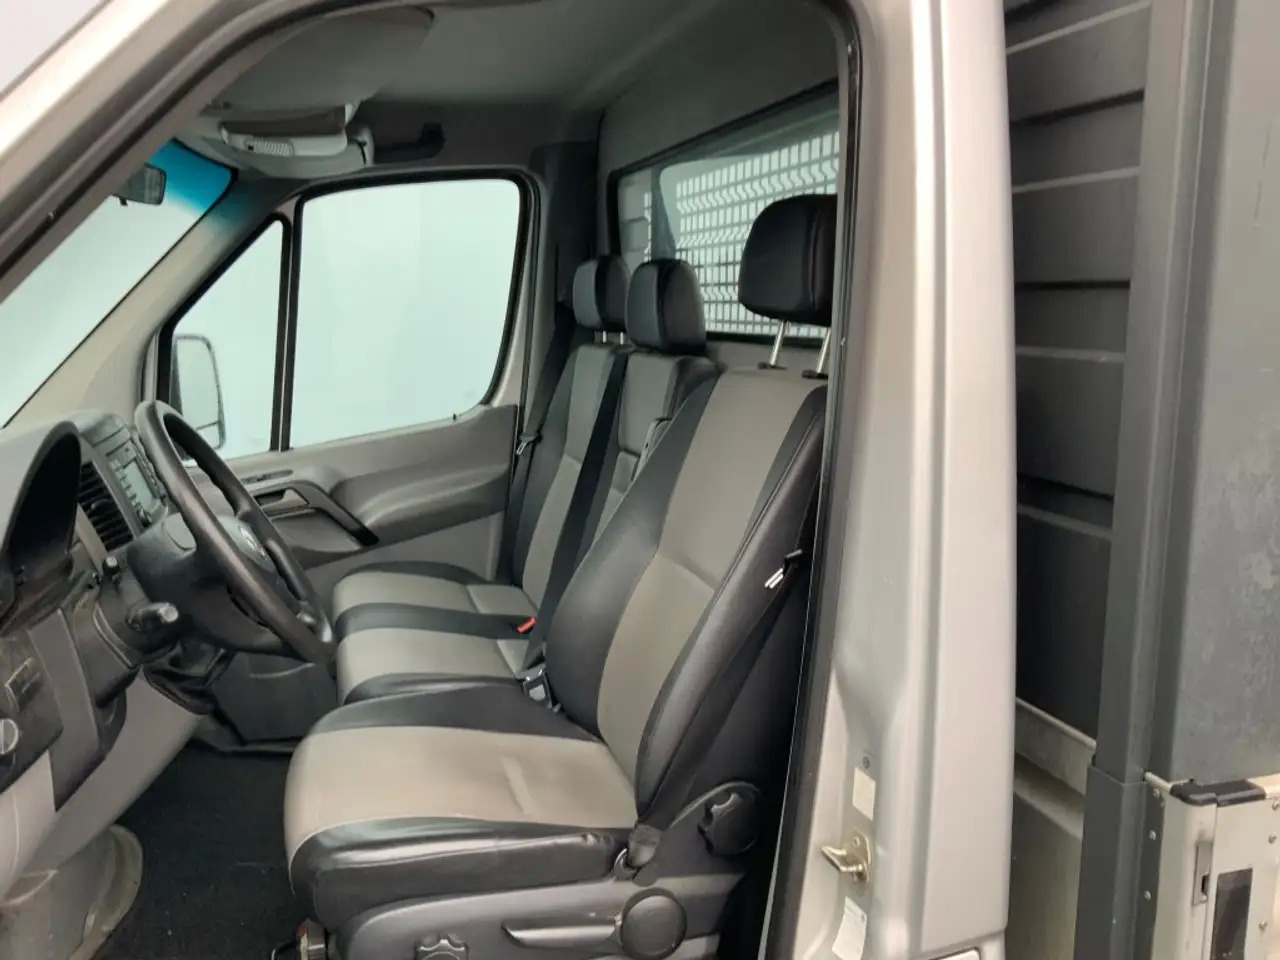 Leasing Volkswagen Crafter 46 2.0 TDI L2H1 Pick Up Airco Navi Cruise 3 Zits E Volkswagen Crafter 46 2.0 TDI L2H1 Pick Up Airco Navi Cruise 3 Zits E: gambar 15